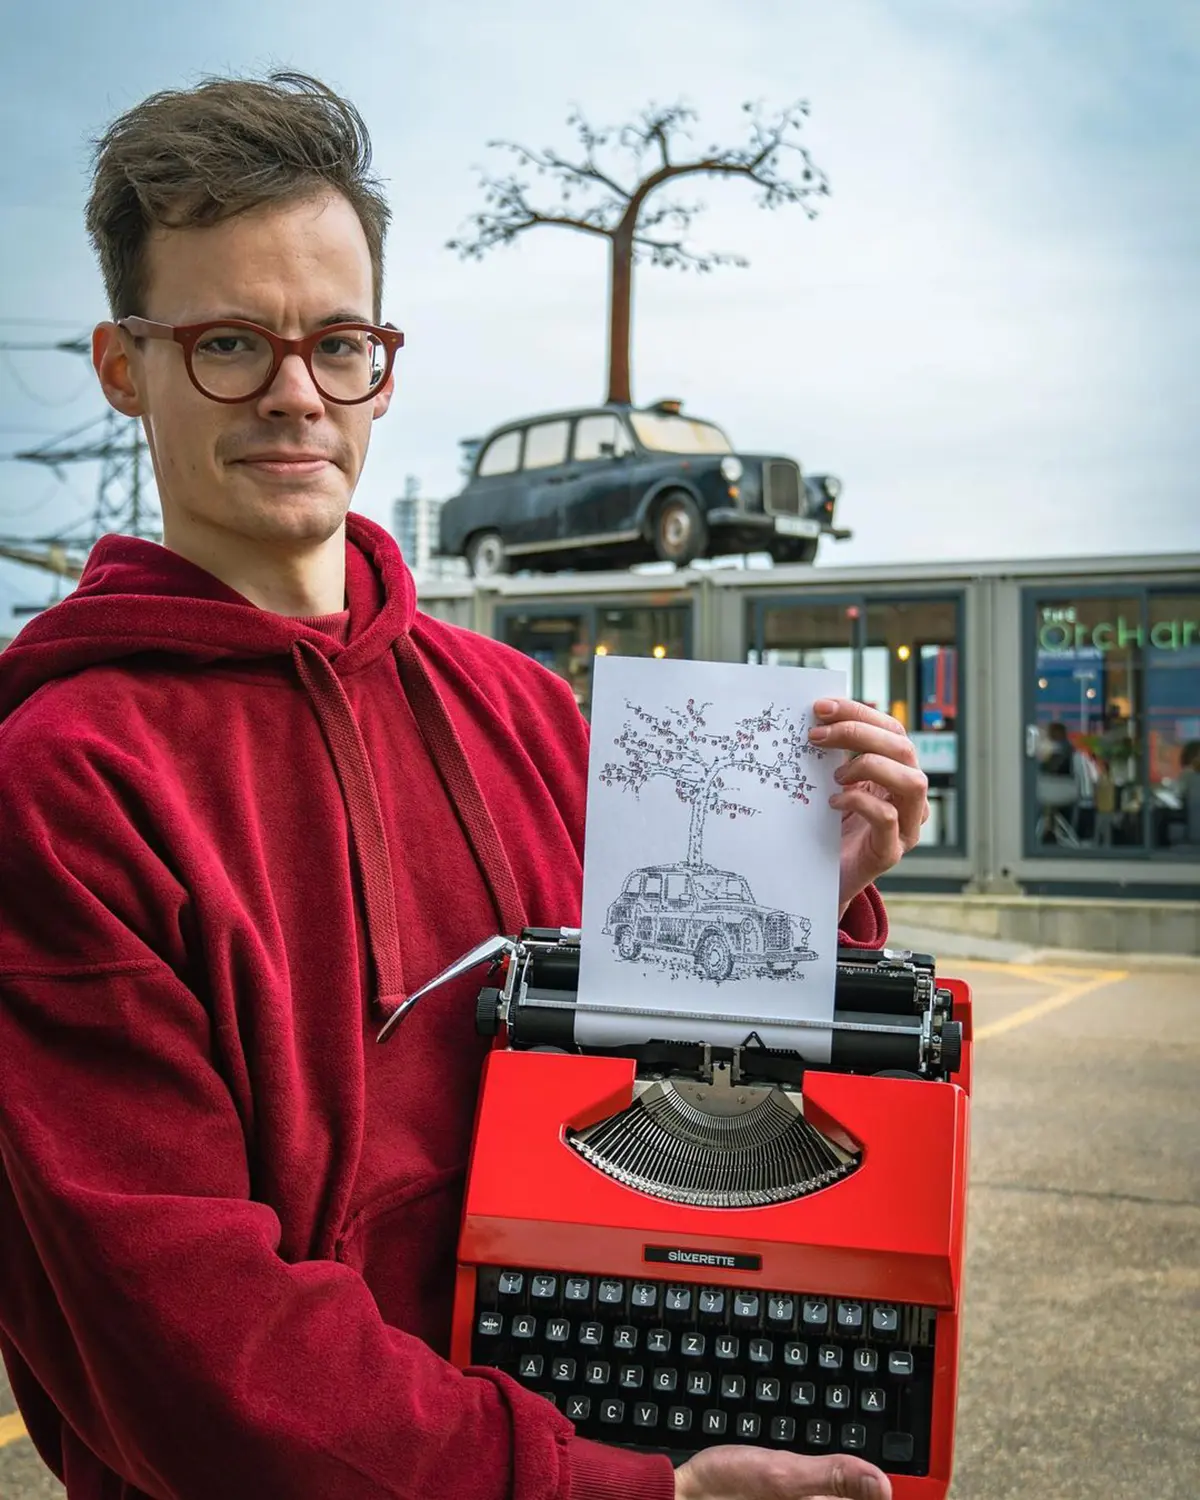 17th-february-2022-_-artist-james-cook-presents-his-completed-drawing-of-a-taxi-sculpture-from-londons-trinity-buoy-wharf.jpg